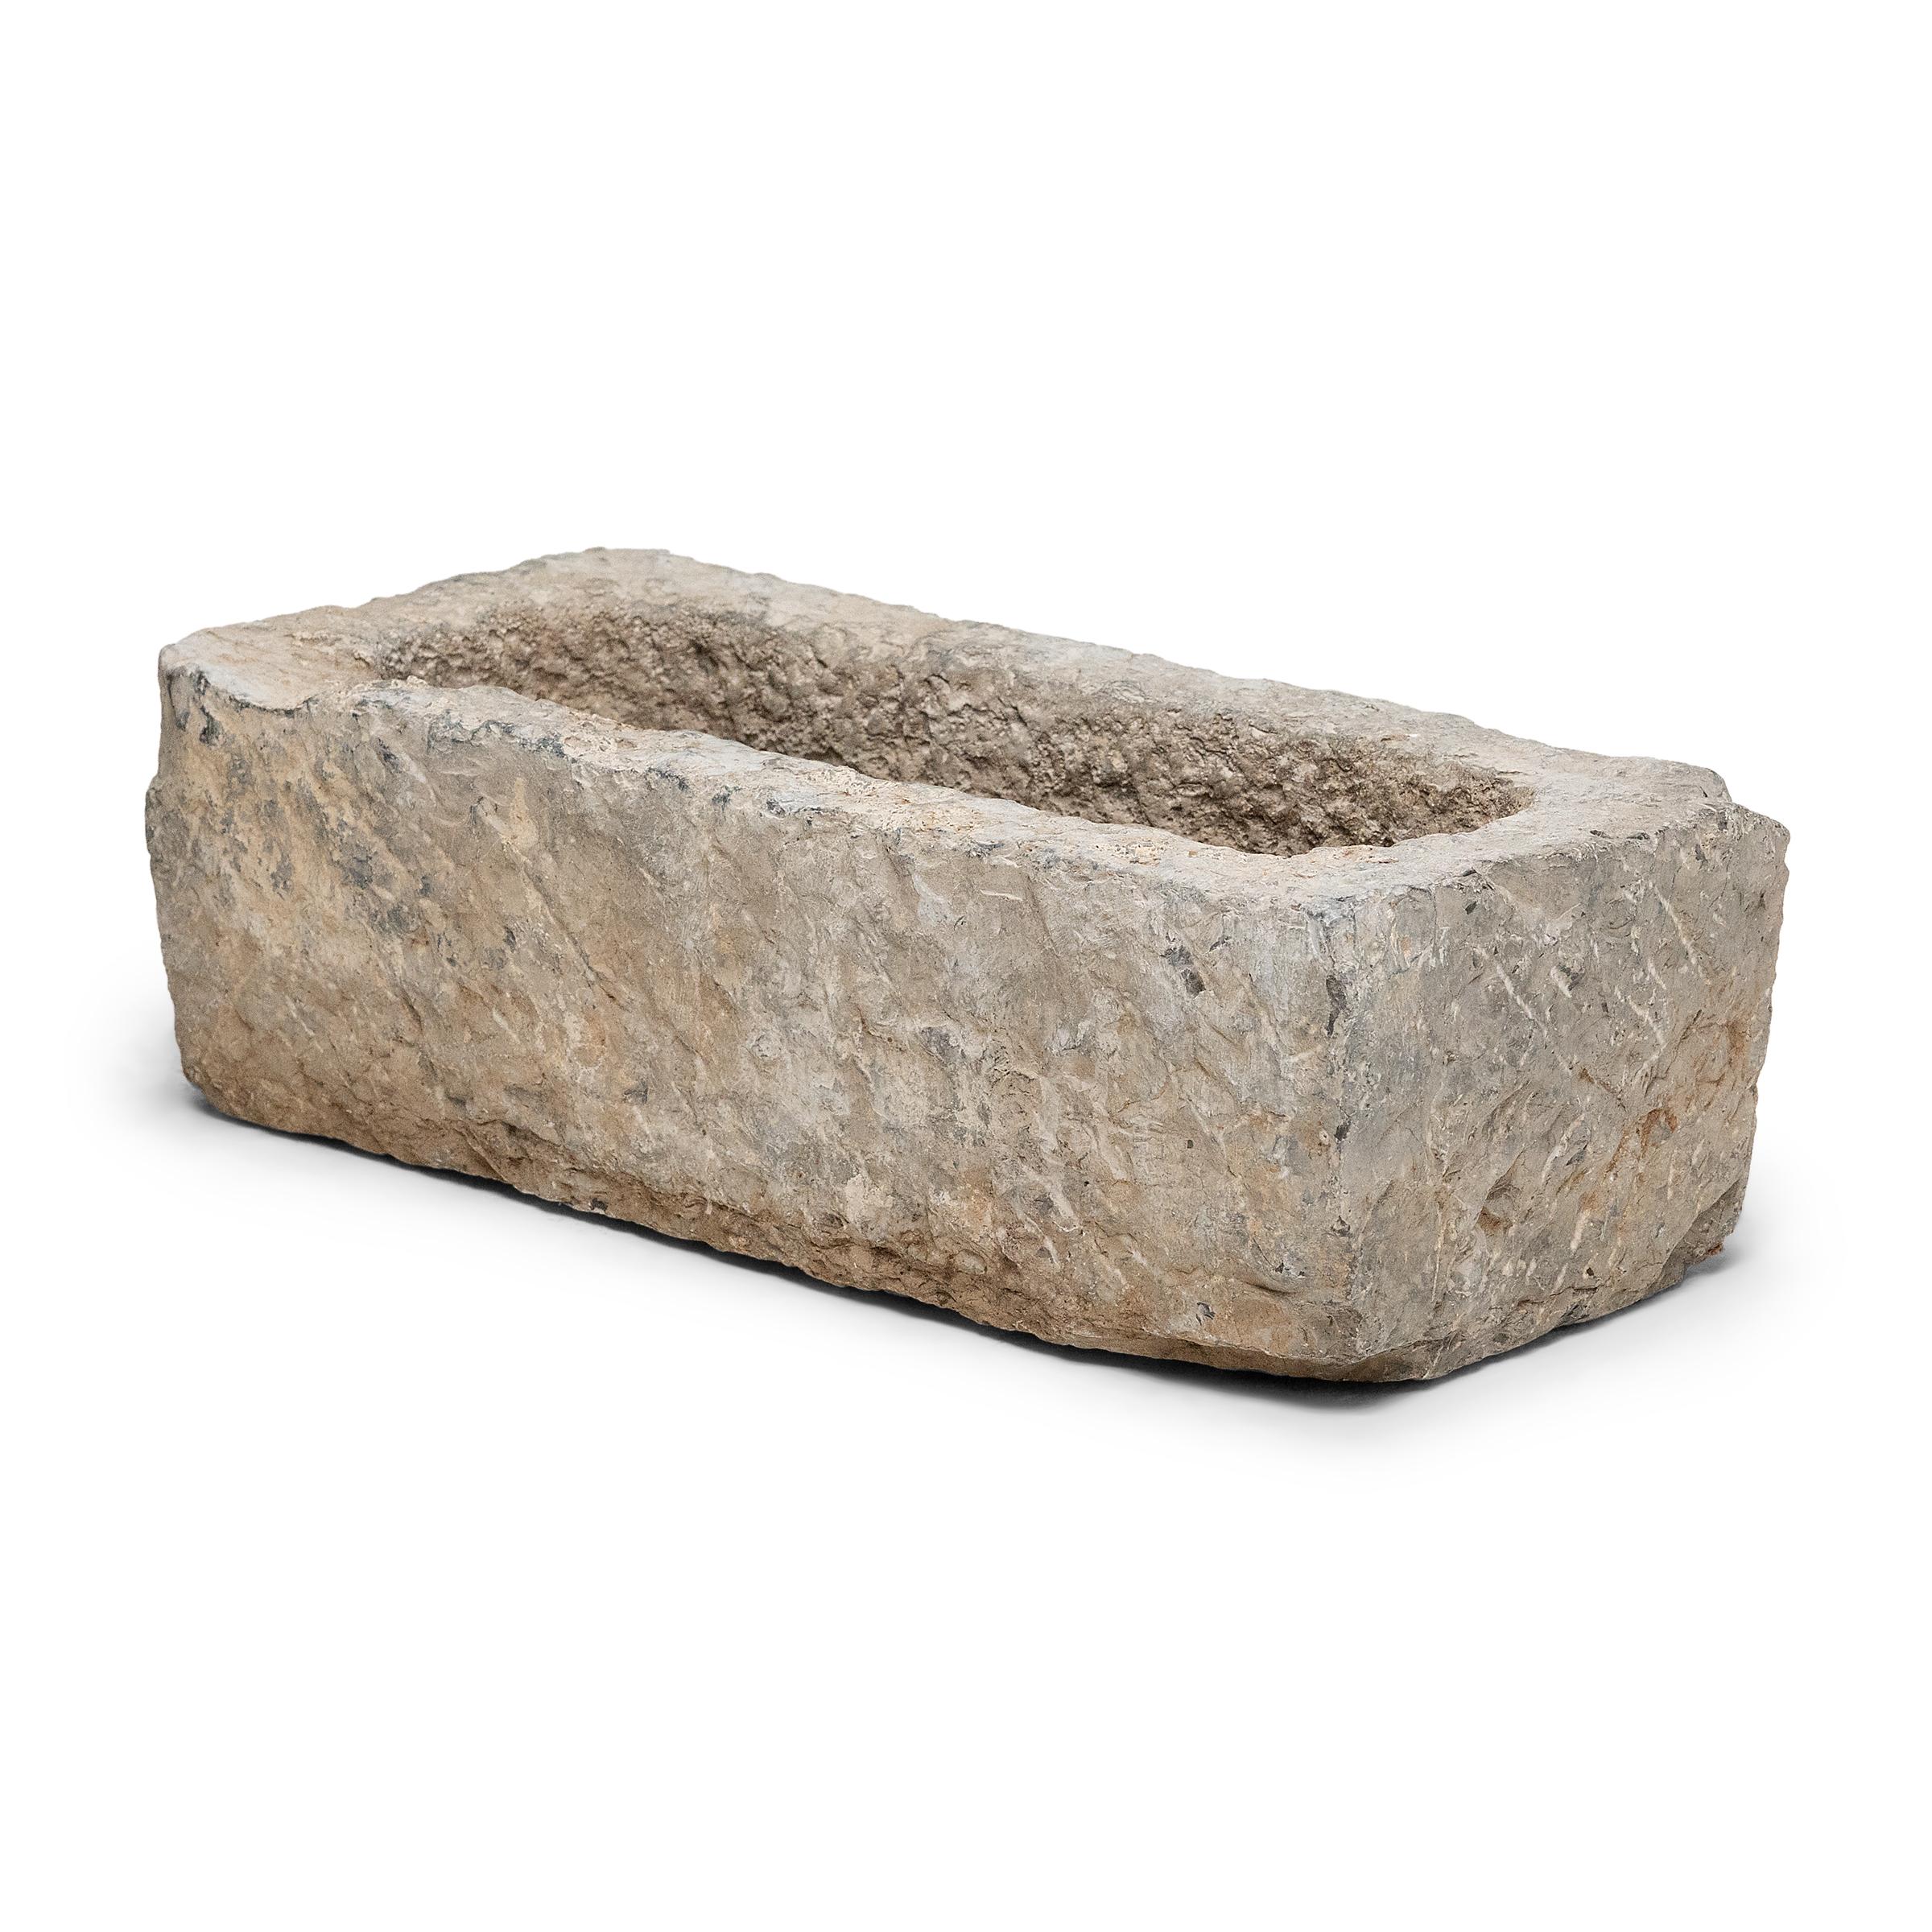 Once used on a provincial Chinese farm to hold water or animal feed, this early 20th-century stone trough is celebrated today for its organic form and rustic authenticity. The trough is hand-carved from solid limestone with a rectangular form,